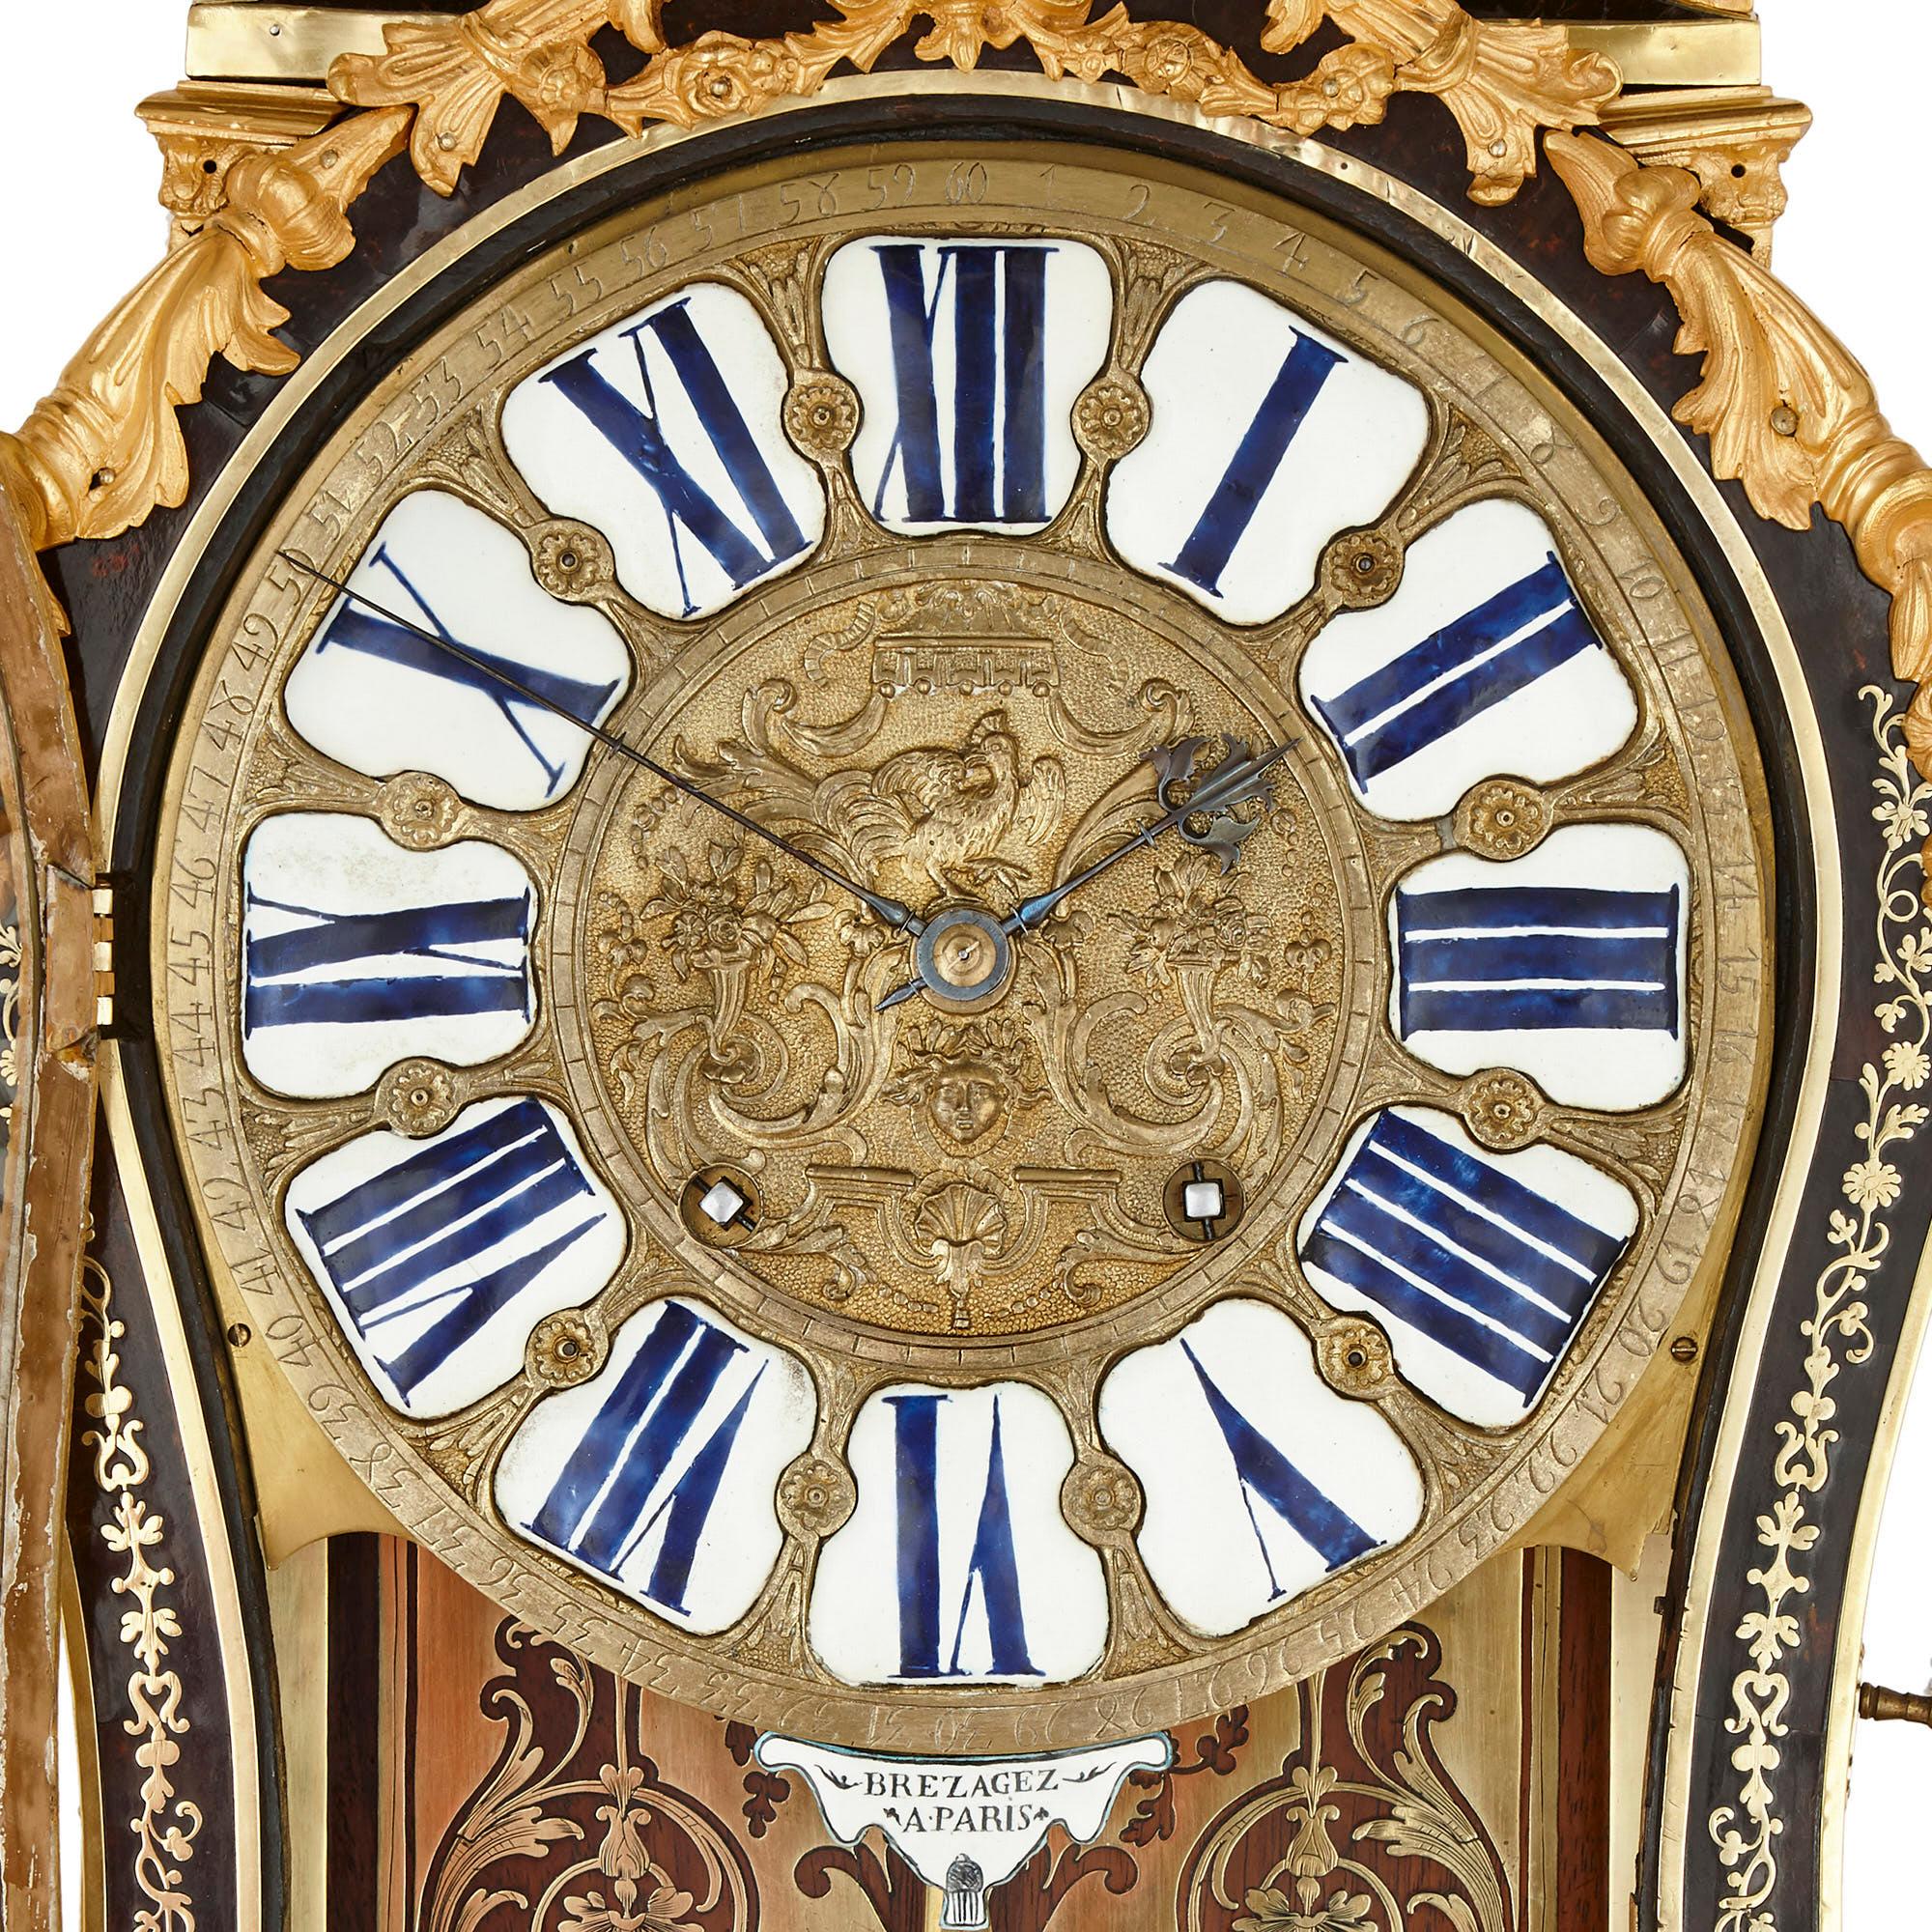 Antique 18th century Boulle bracket clock by Brezagez and Marchand
French, circa 1740
Measures: Clock: Height 87cm, width 47cm, depth 21cm
Bracket: Height 40cm, width 53cm, depth 24cm
Total: Height 127cm

This beautiful 18th century French